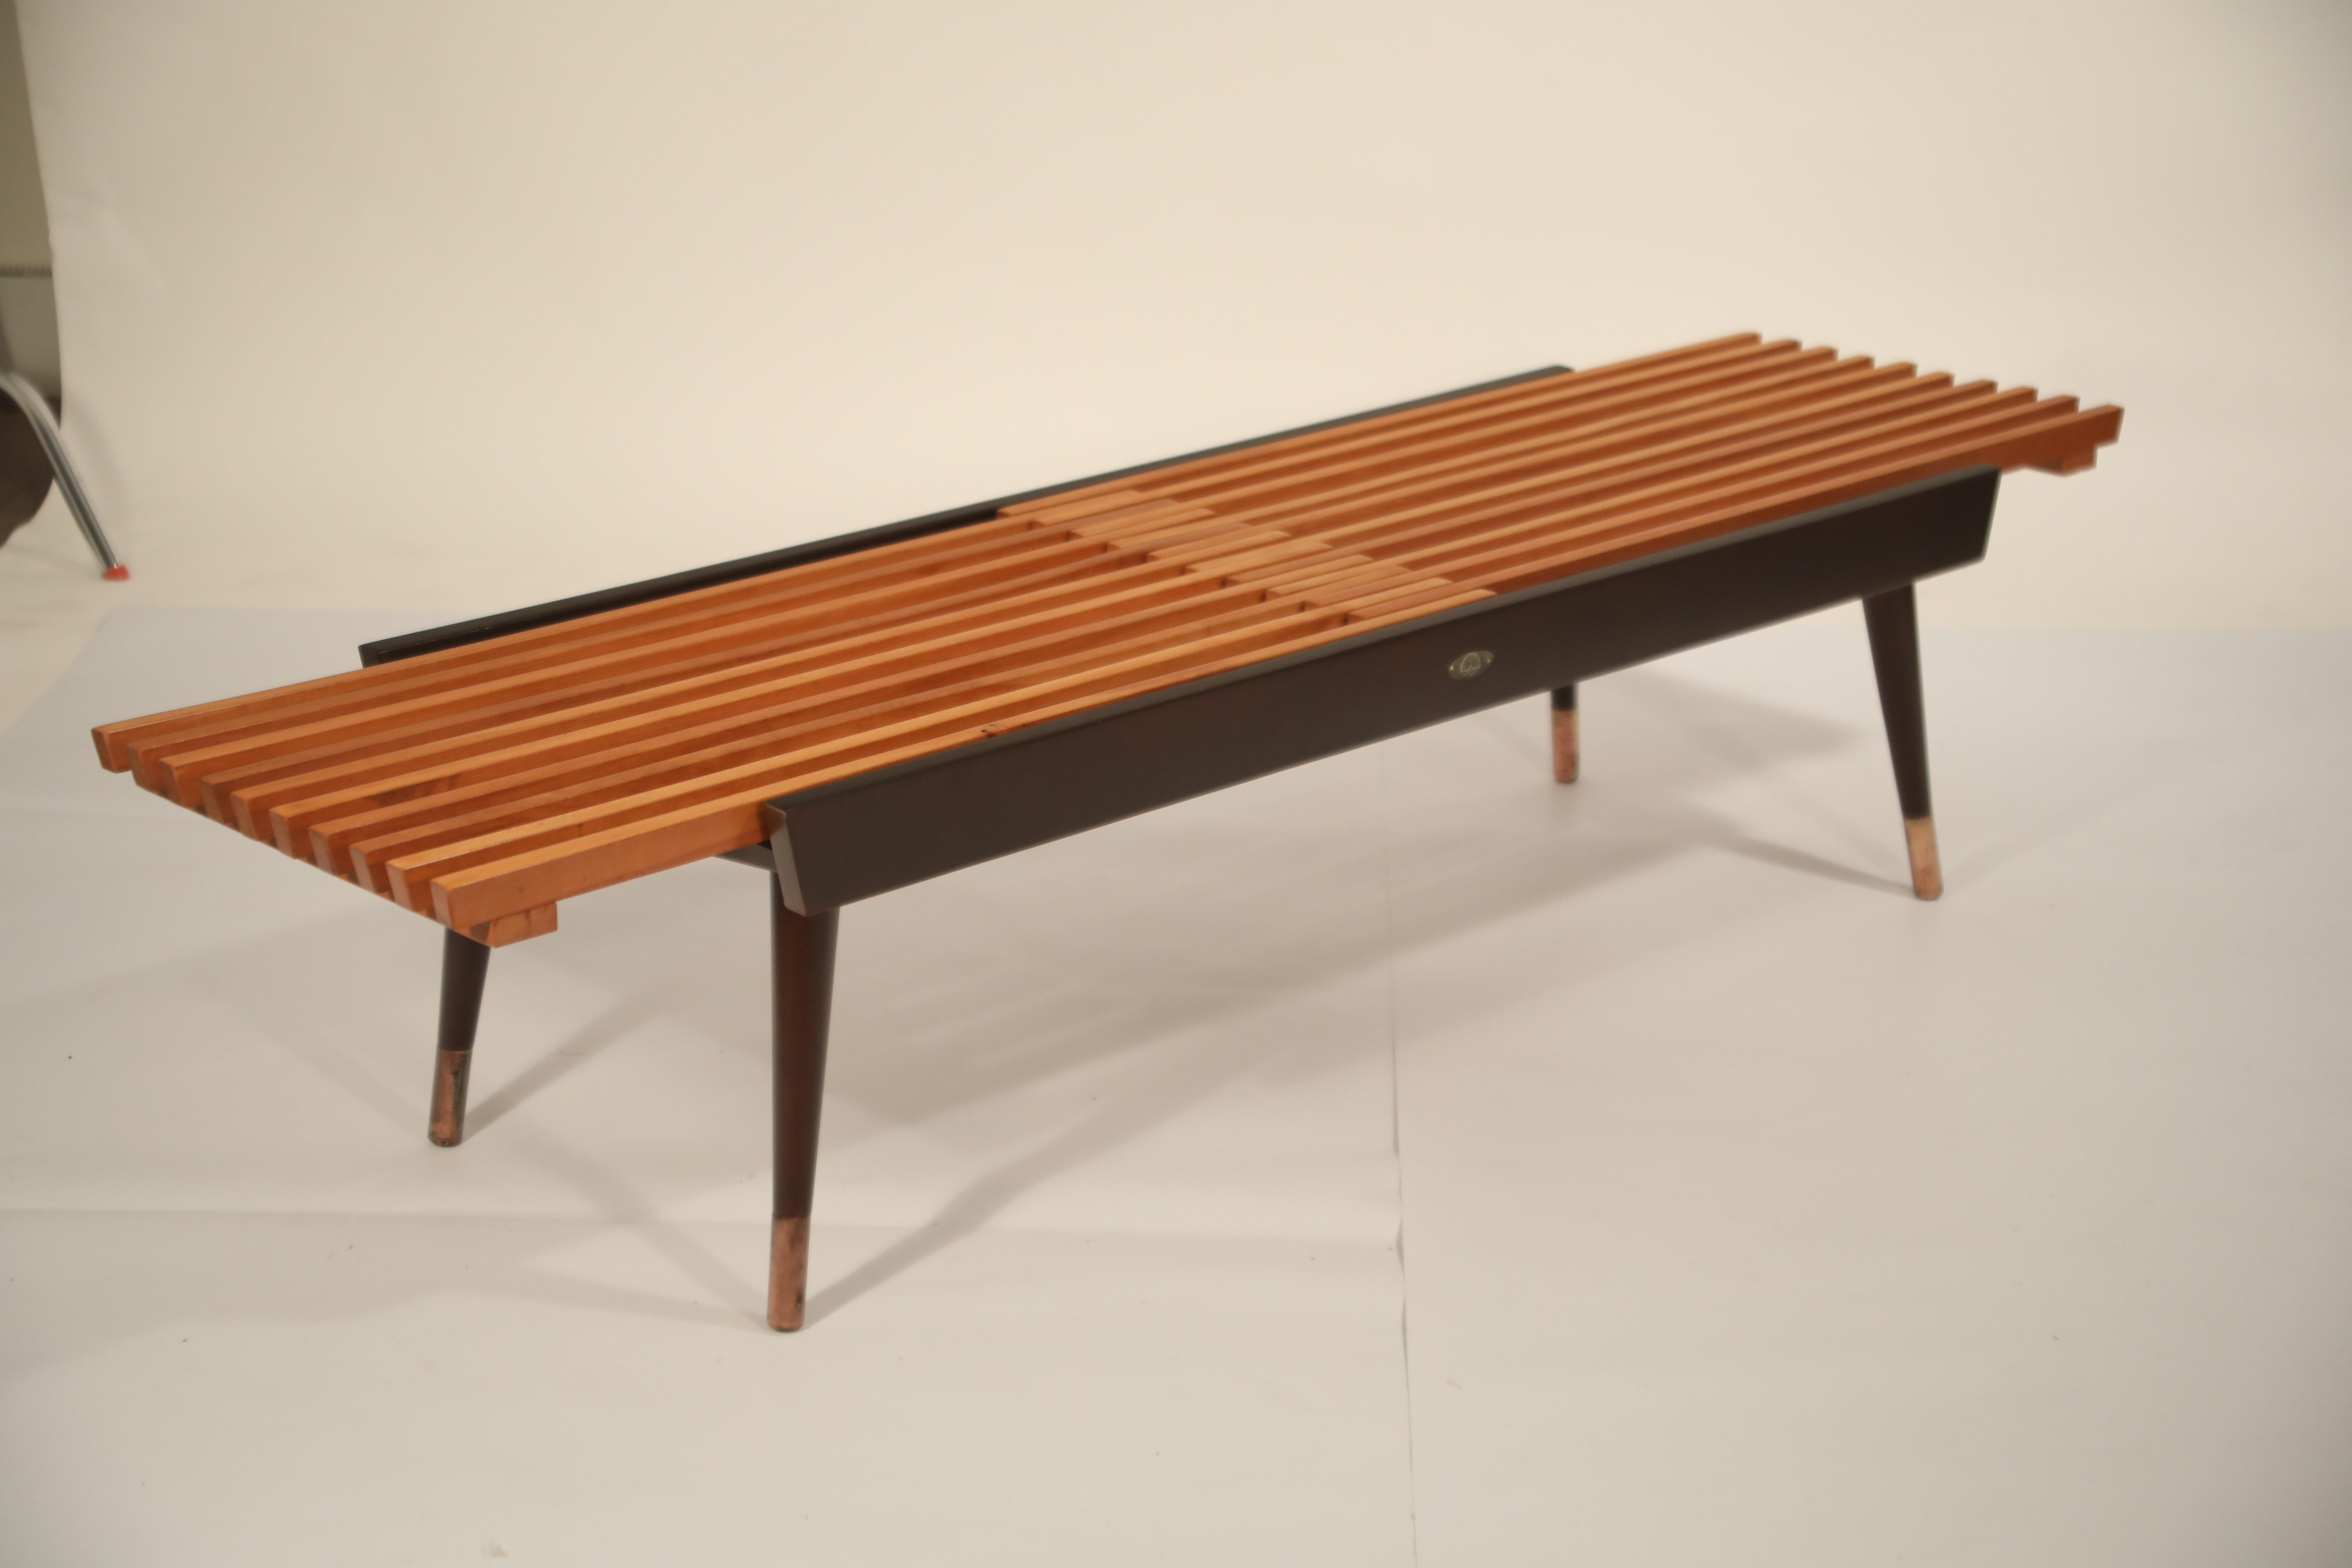 Extendable Slatted Wood Bench or Coffee Table by Maruni, 1950s Hiroshima Japan 2